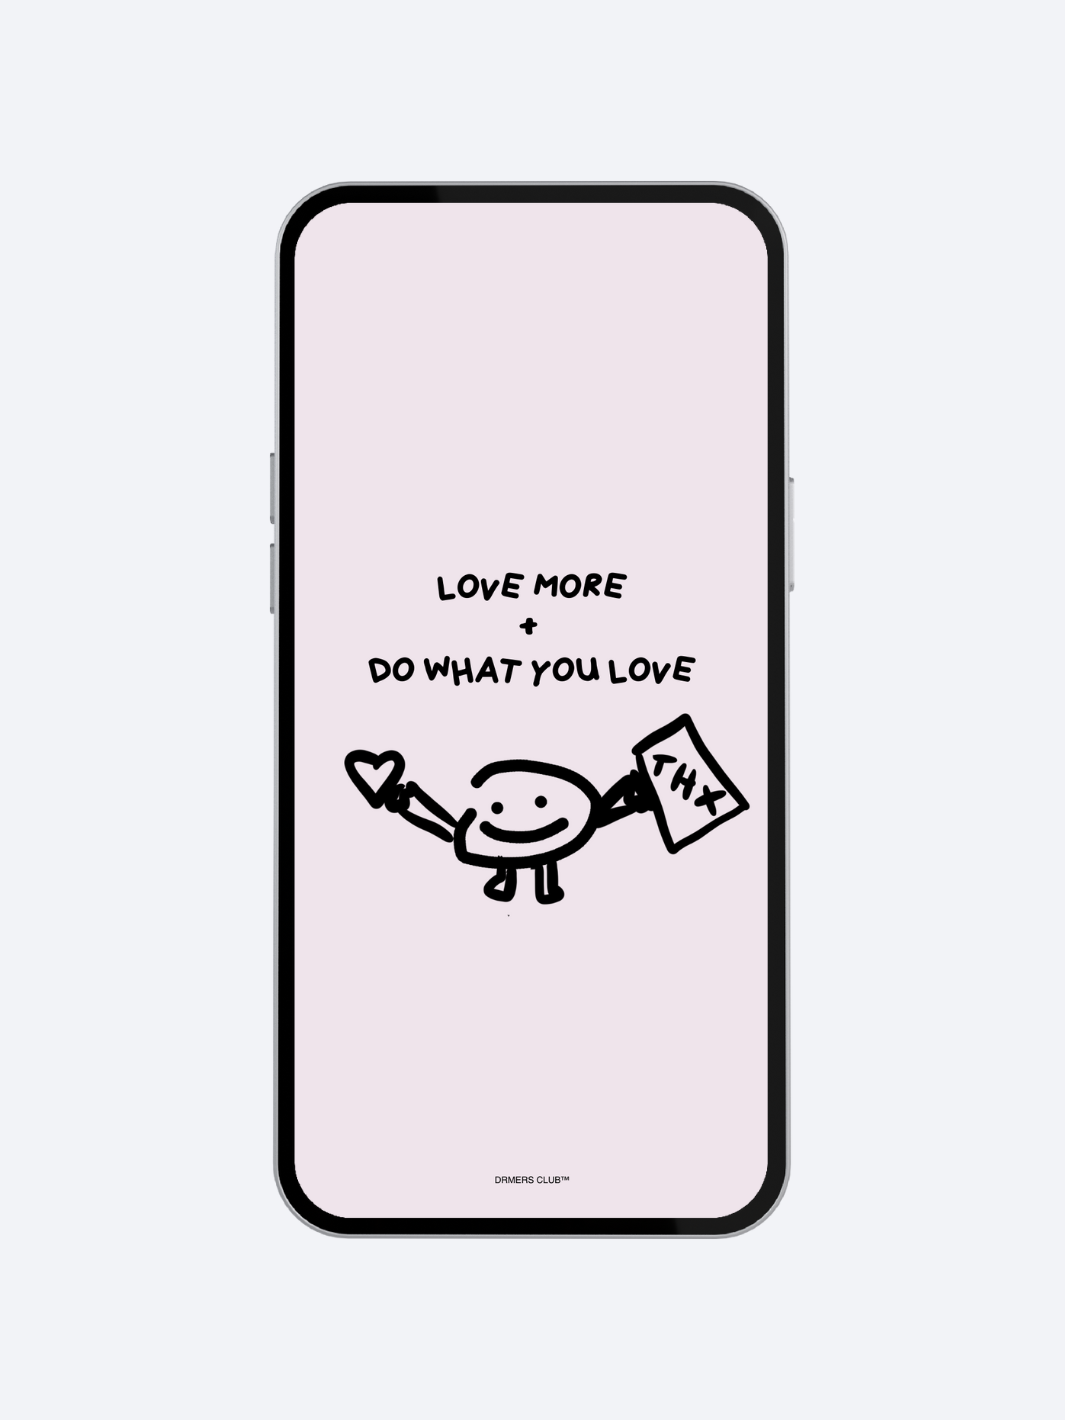 DO WHAT YOU LOVE WALLPAPER